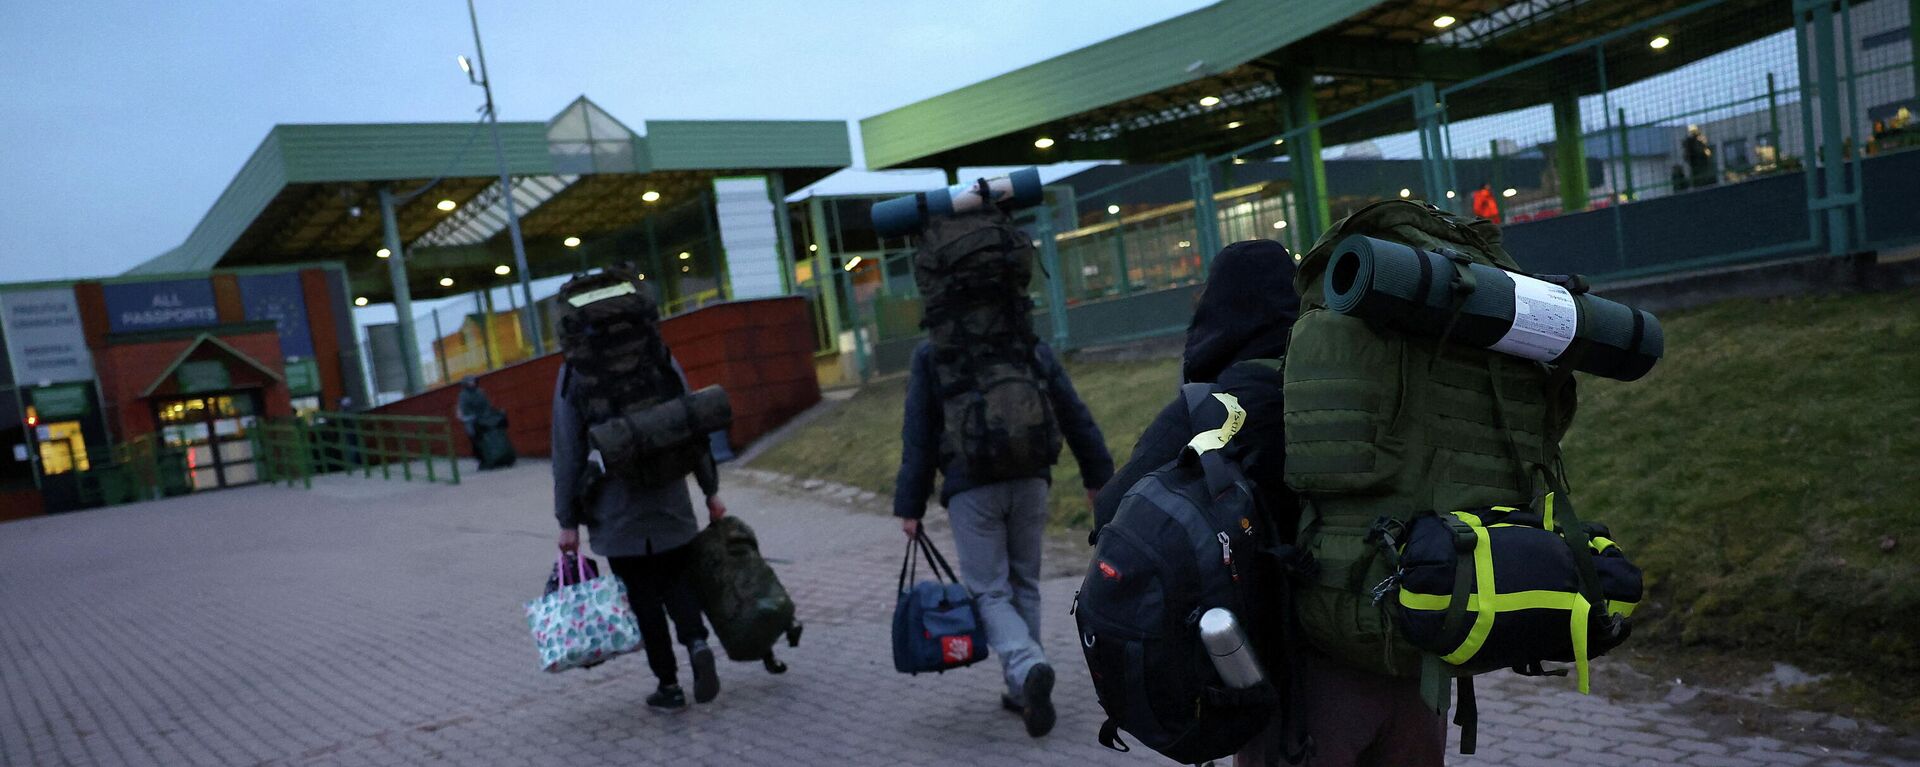 Ukrainian men carry their equipment towards the border as they return to Ukraine to fight the Russian forces, at the border checkpoint in Medyka, Poland, March 2, 2022 - Sputnik International, 1920, 03.03.2022